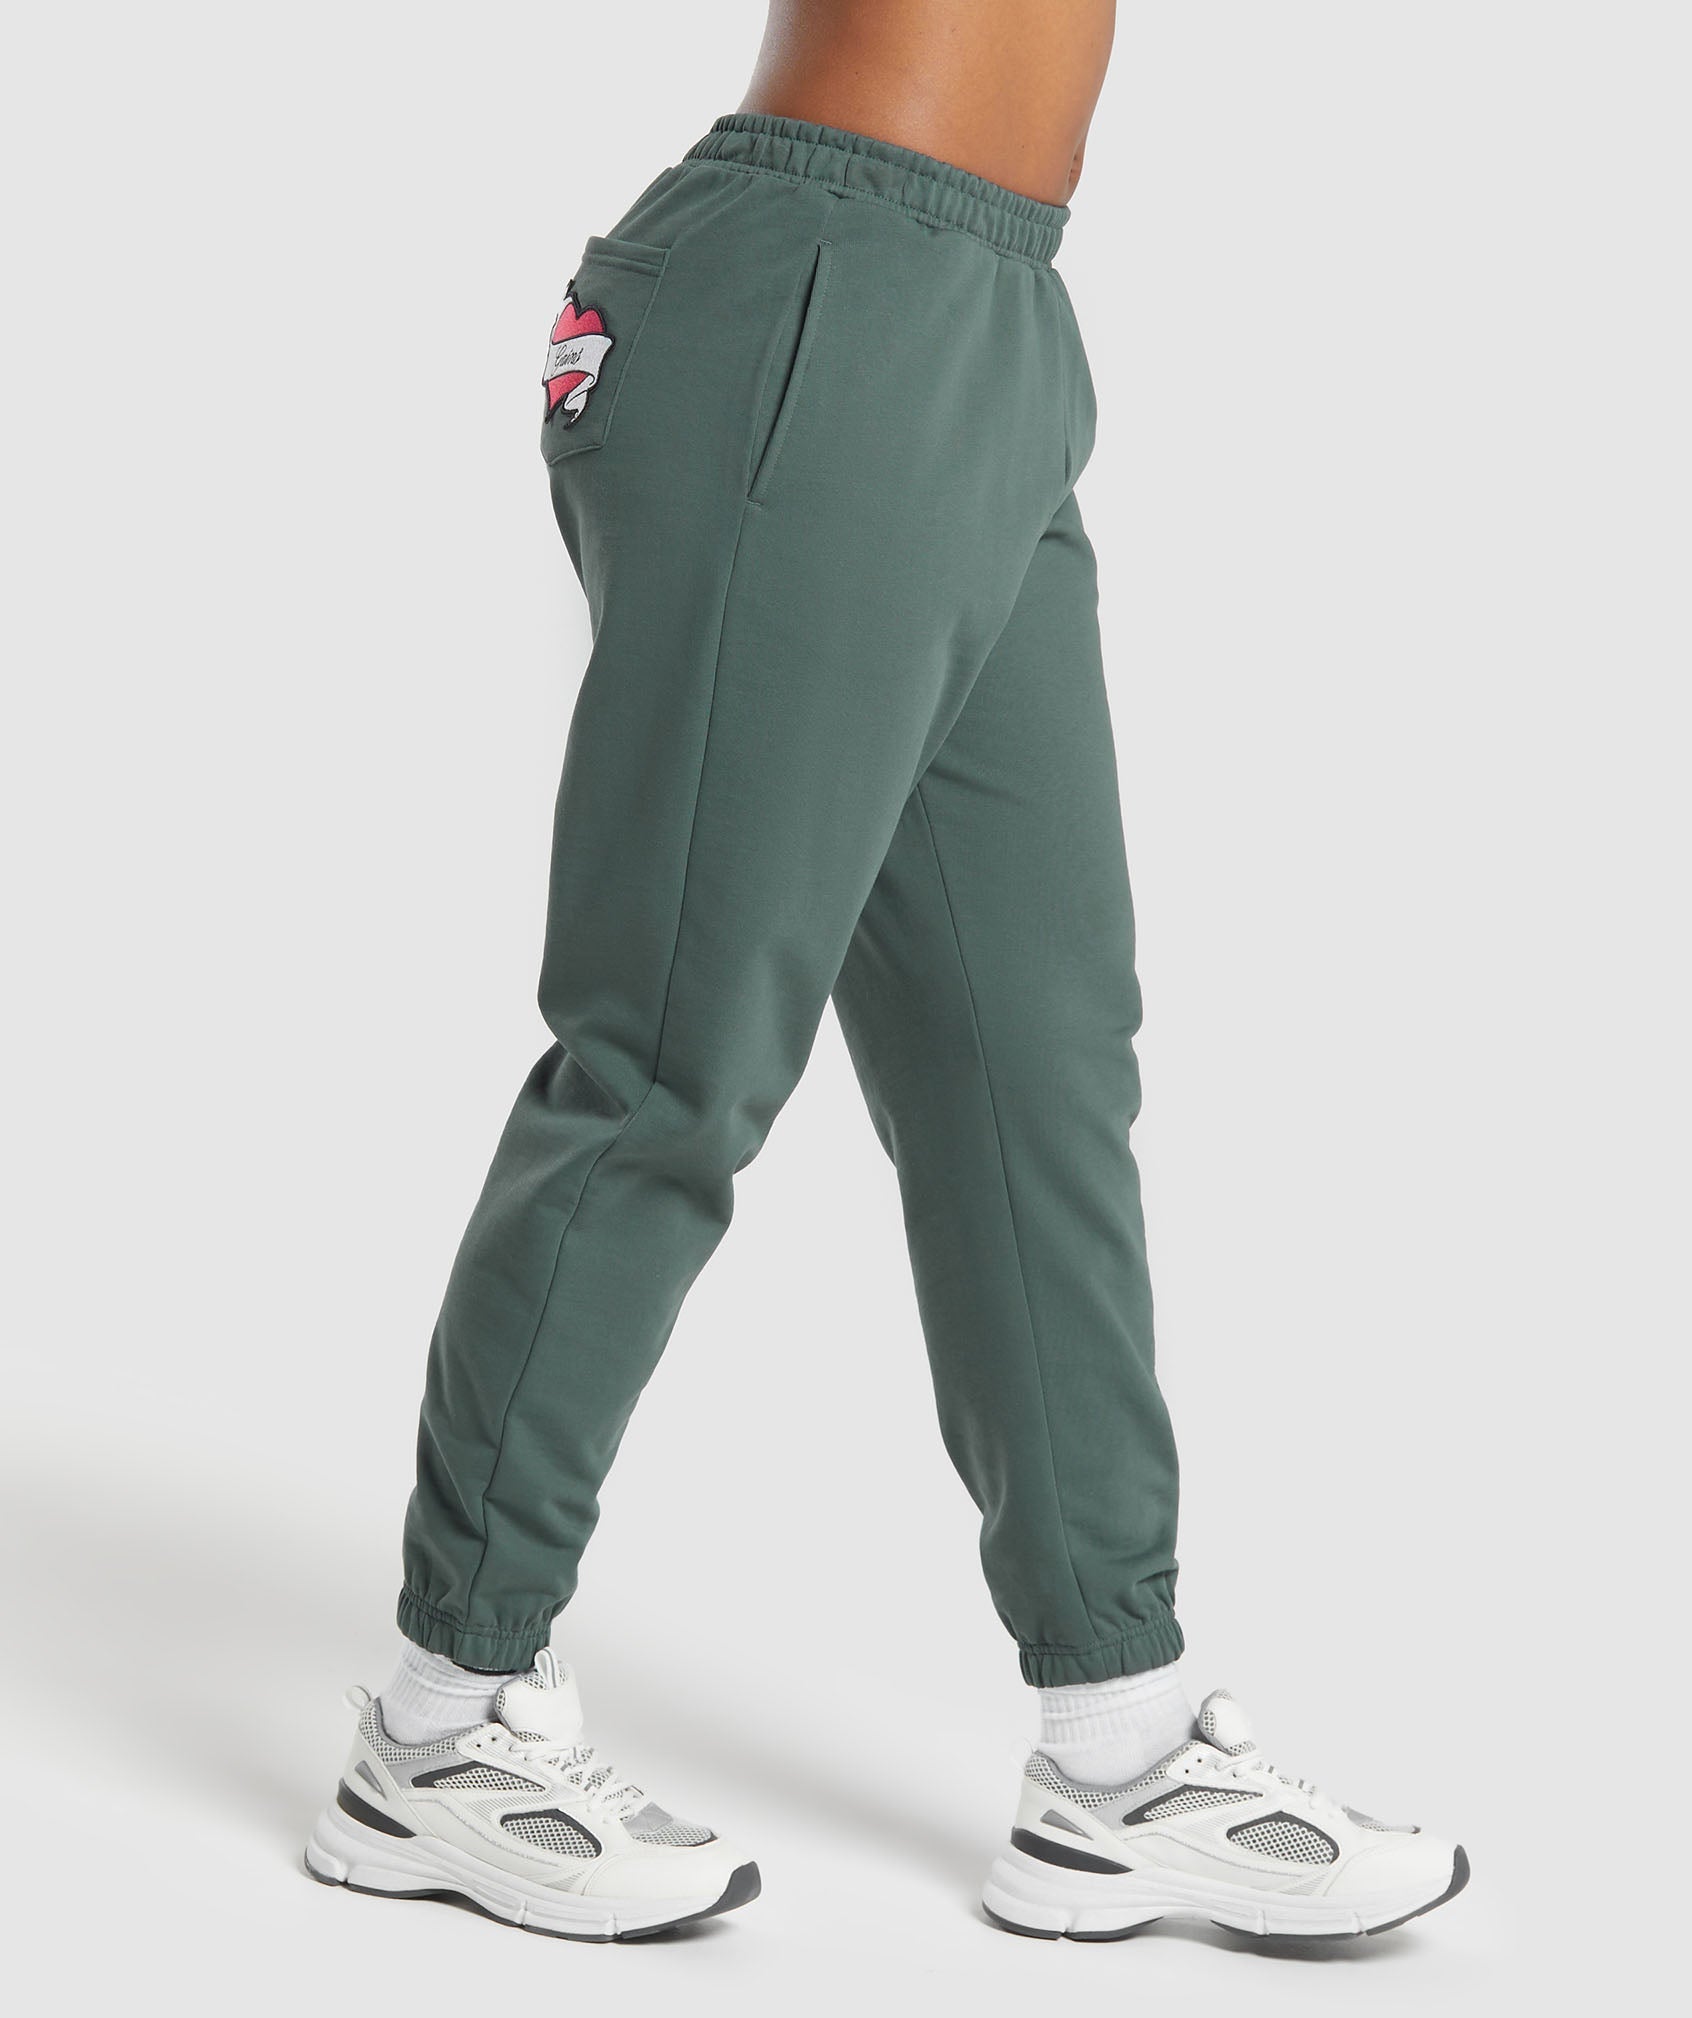 Tattoo Joggers in Slate Teal - view 3